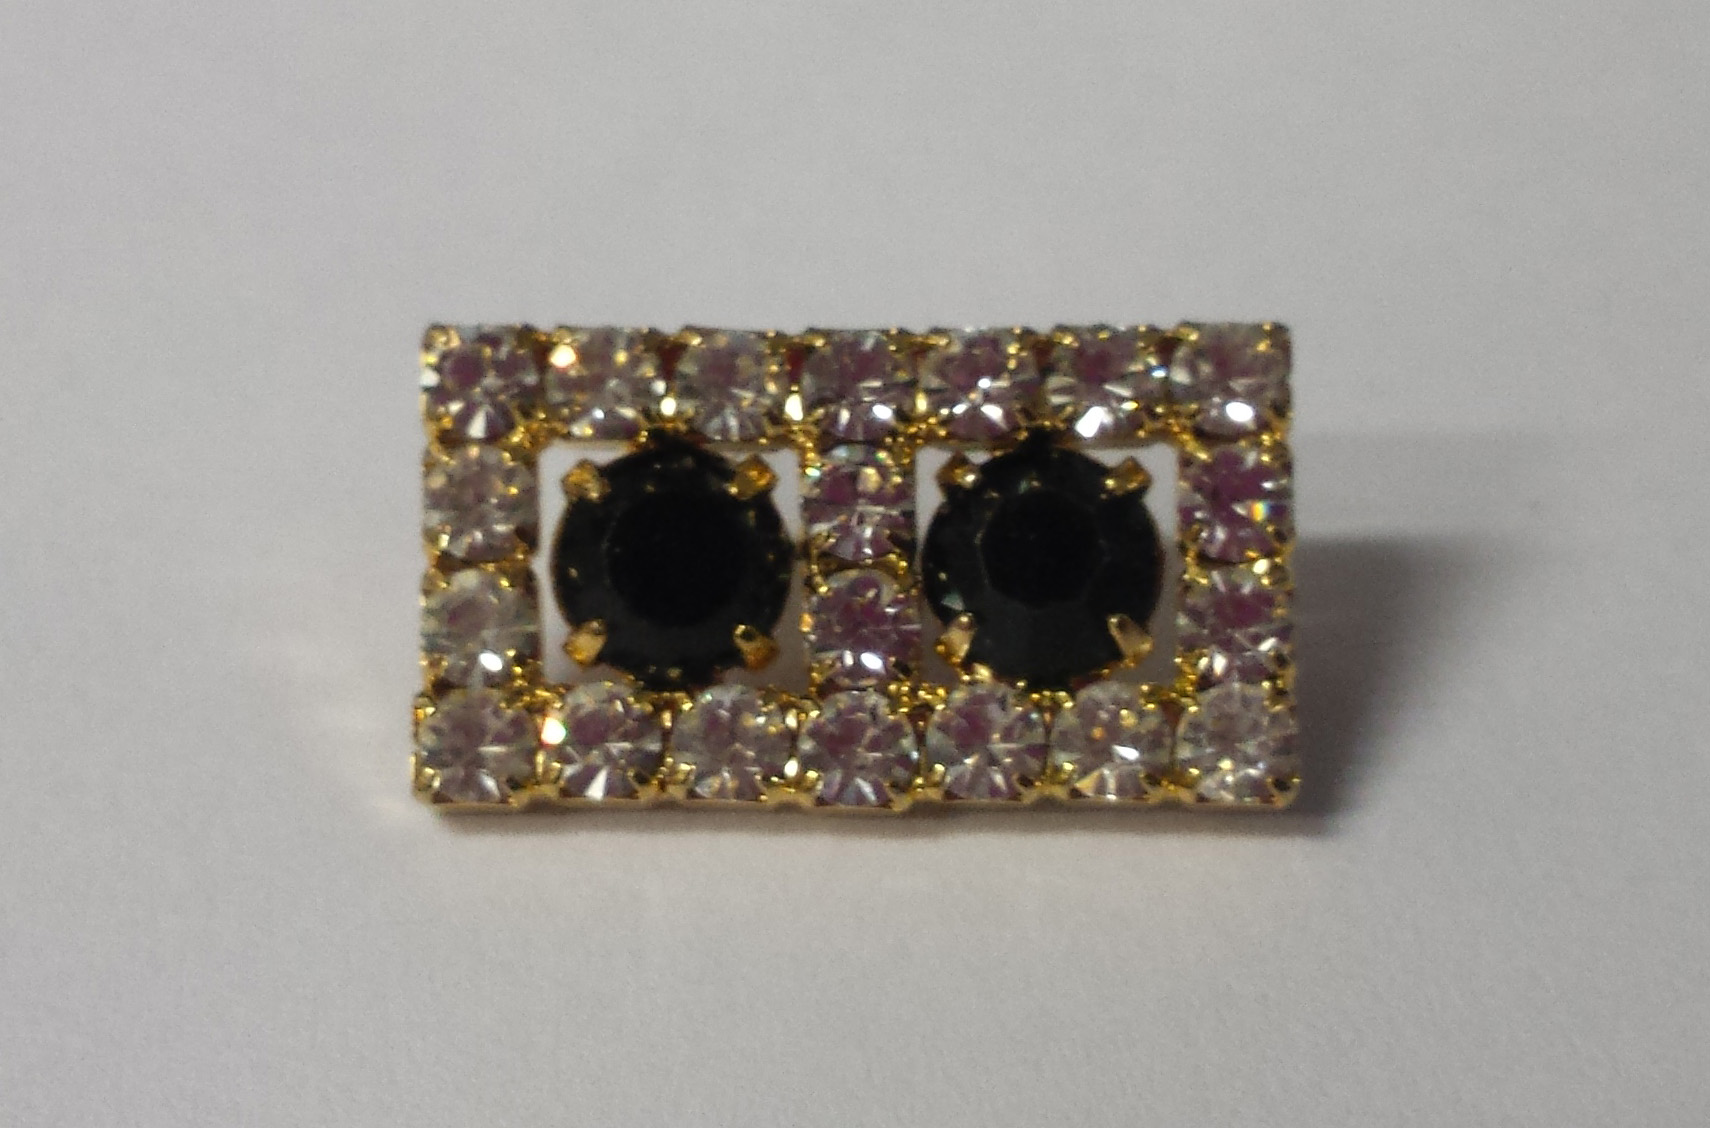 Dazzling Rectangular Rhinestone Button Crystal and Black with Gold Backs - 1 inch by 1/2 inch #Daz0009